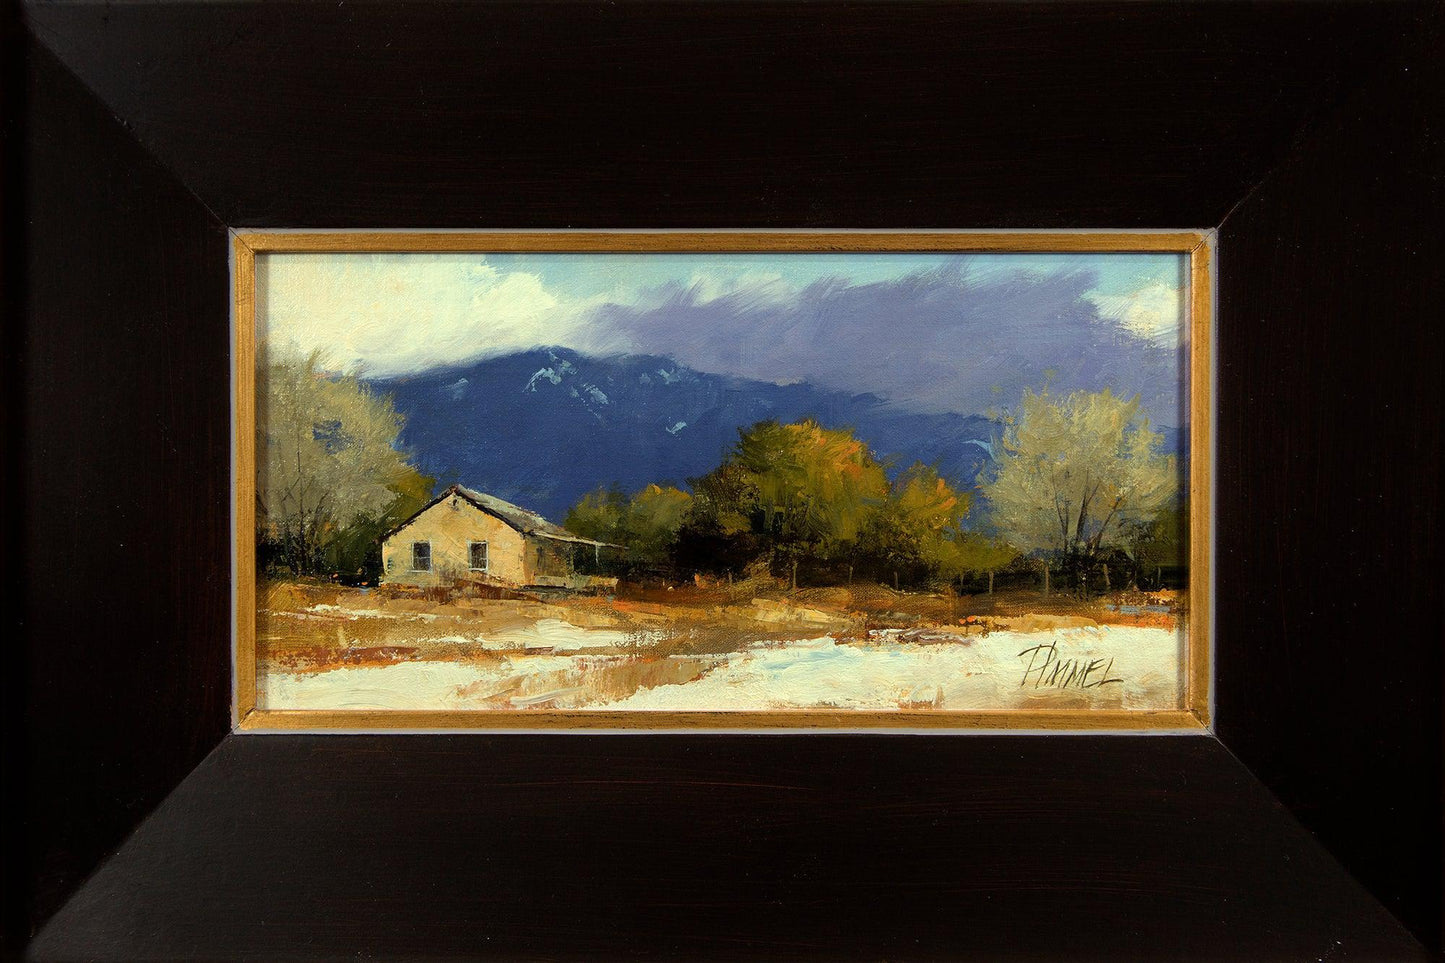 The Day After Thanksgiving-Painting-Peggy Immel-Sorrel Sky Gallery